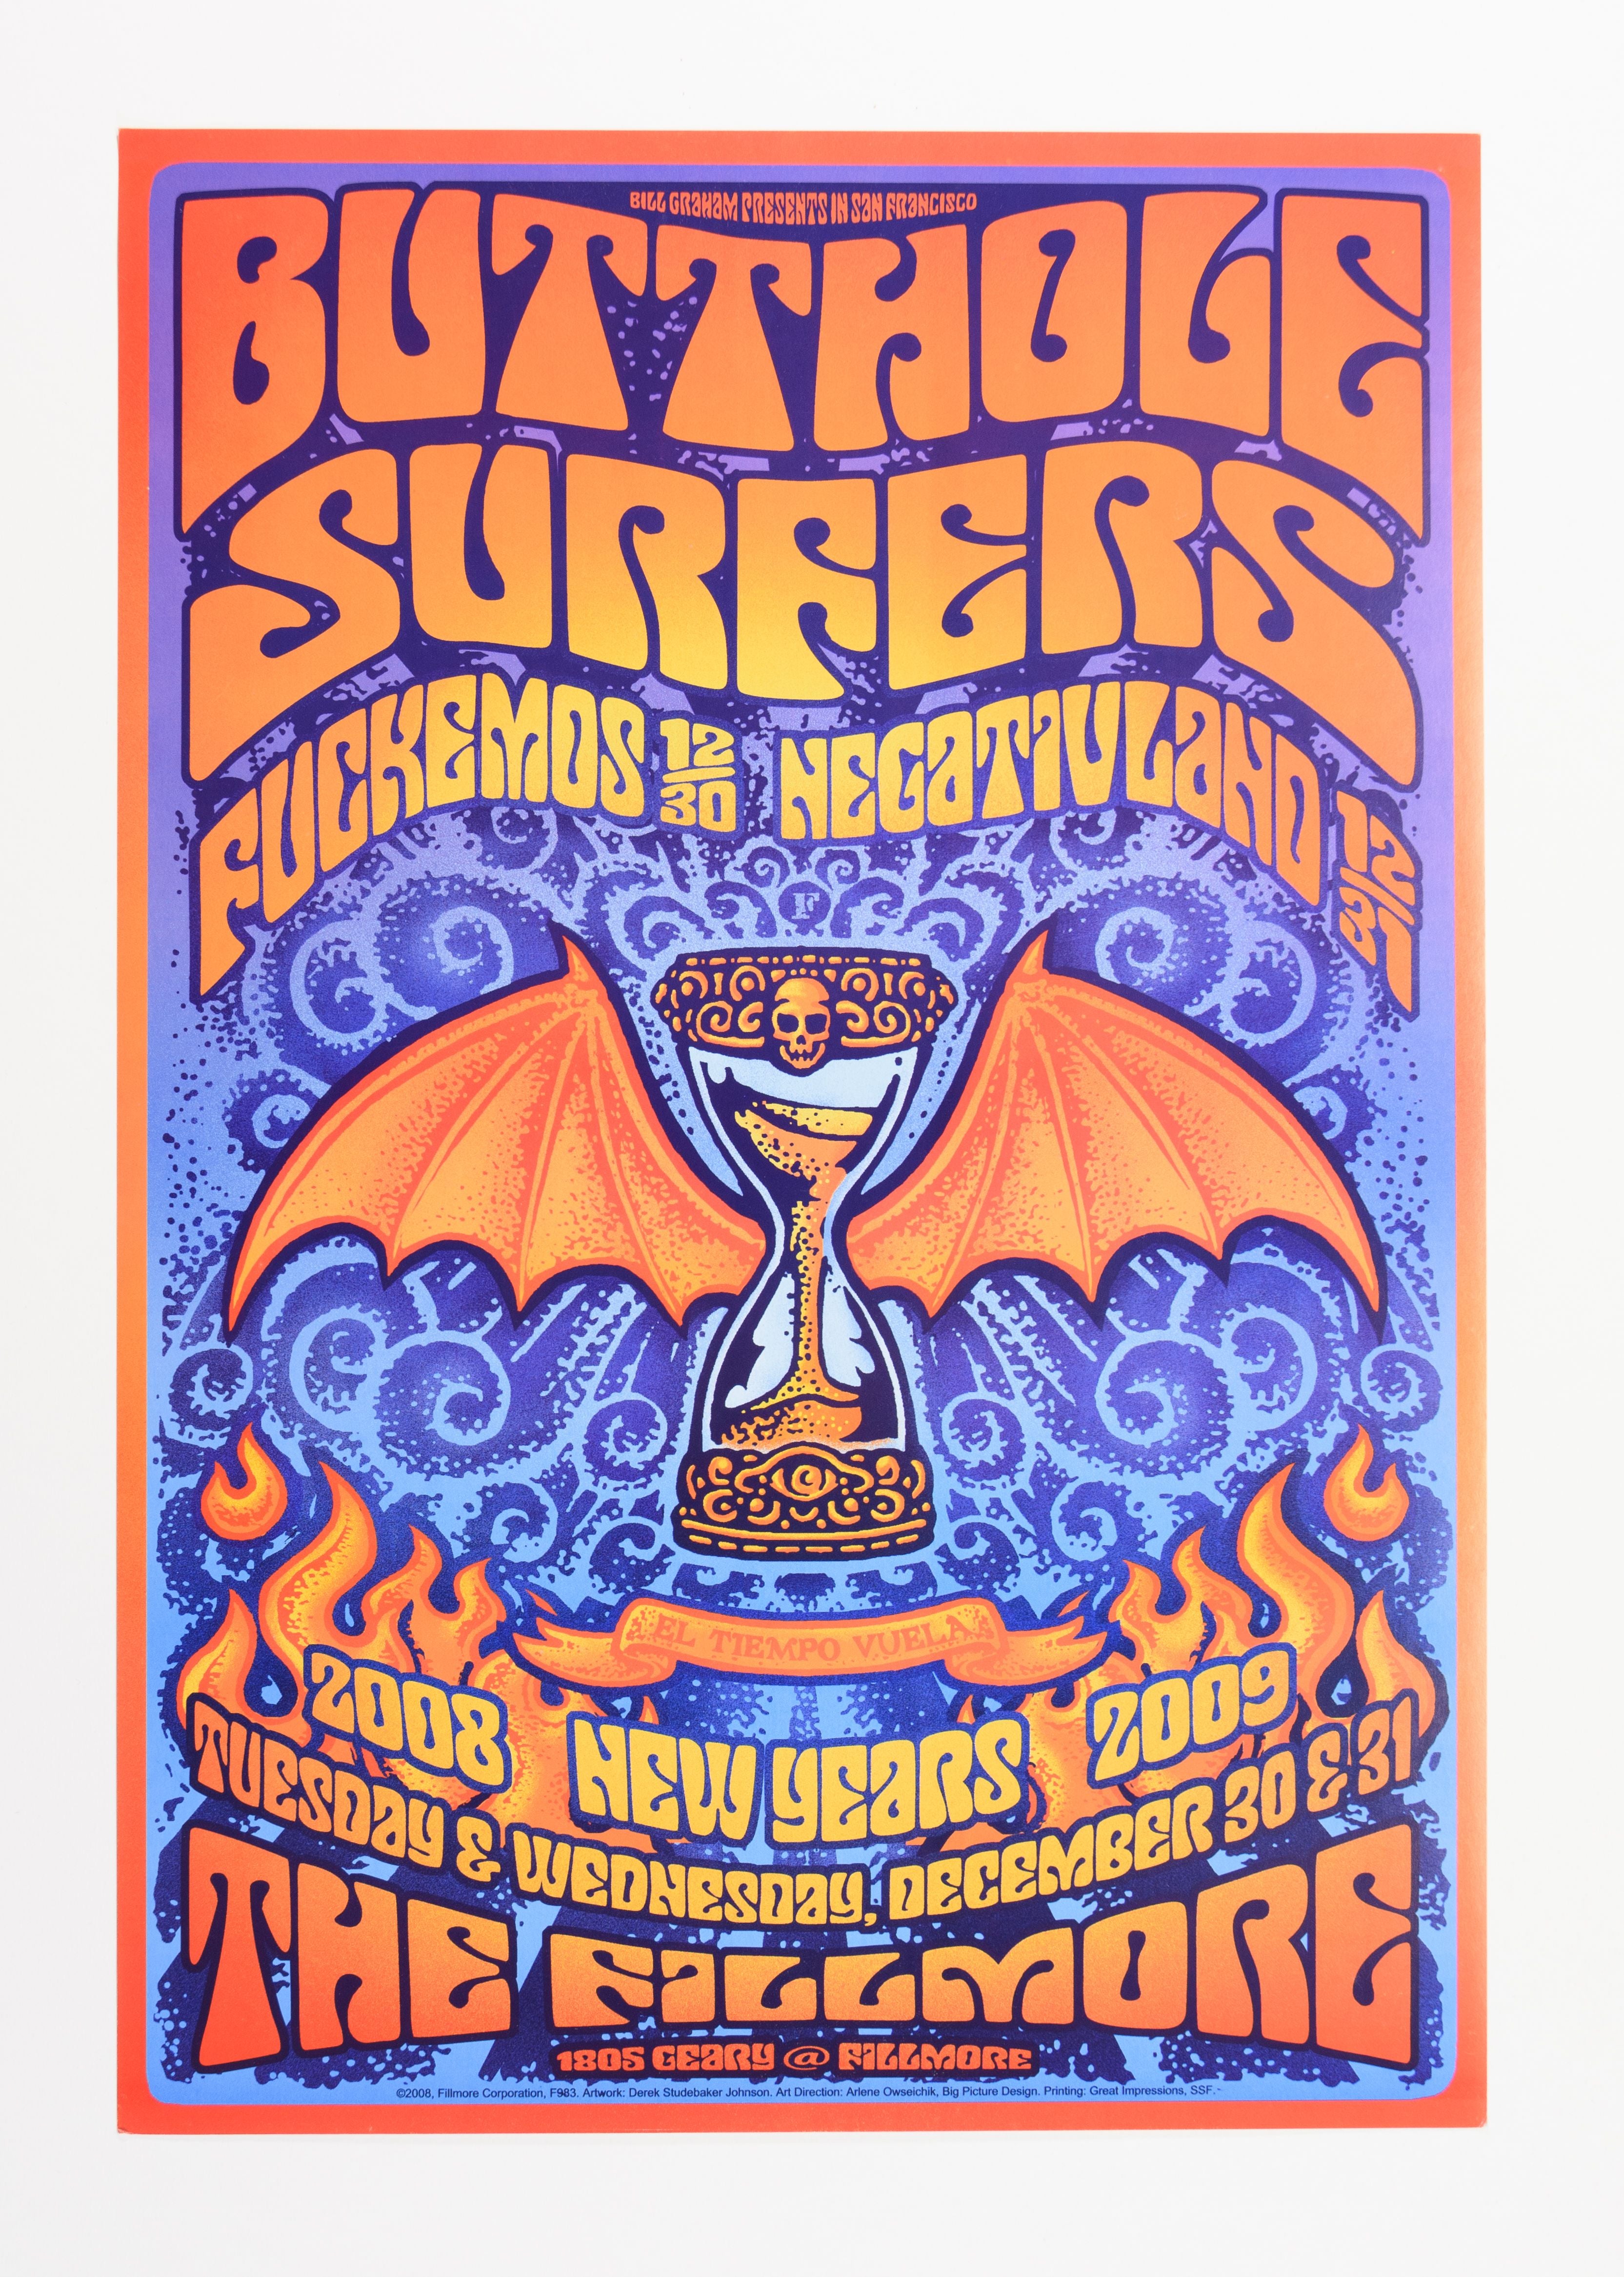 Psychedelic Art Exchange   |   Collectible Posters and Memorabilia